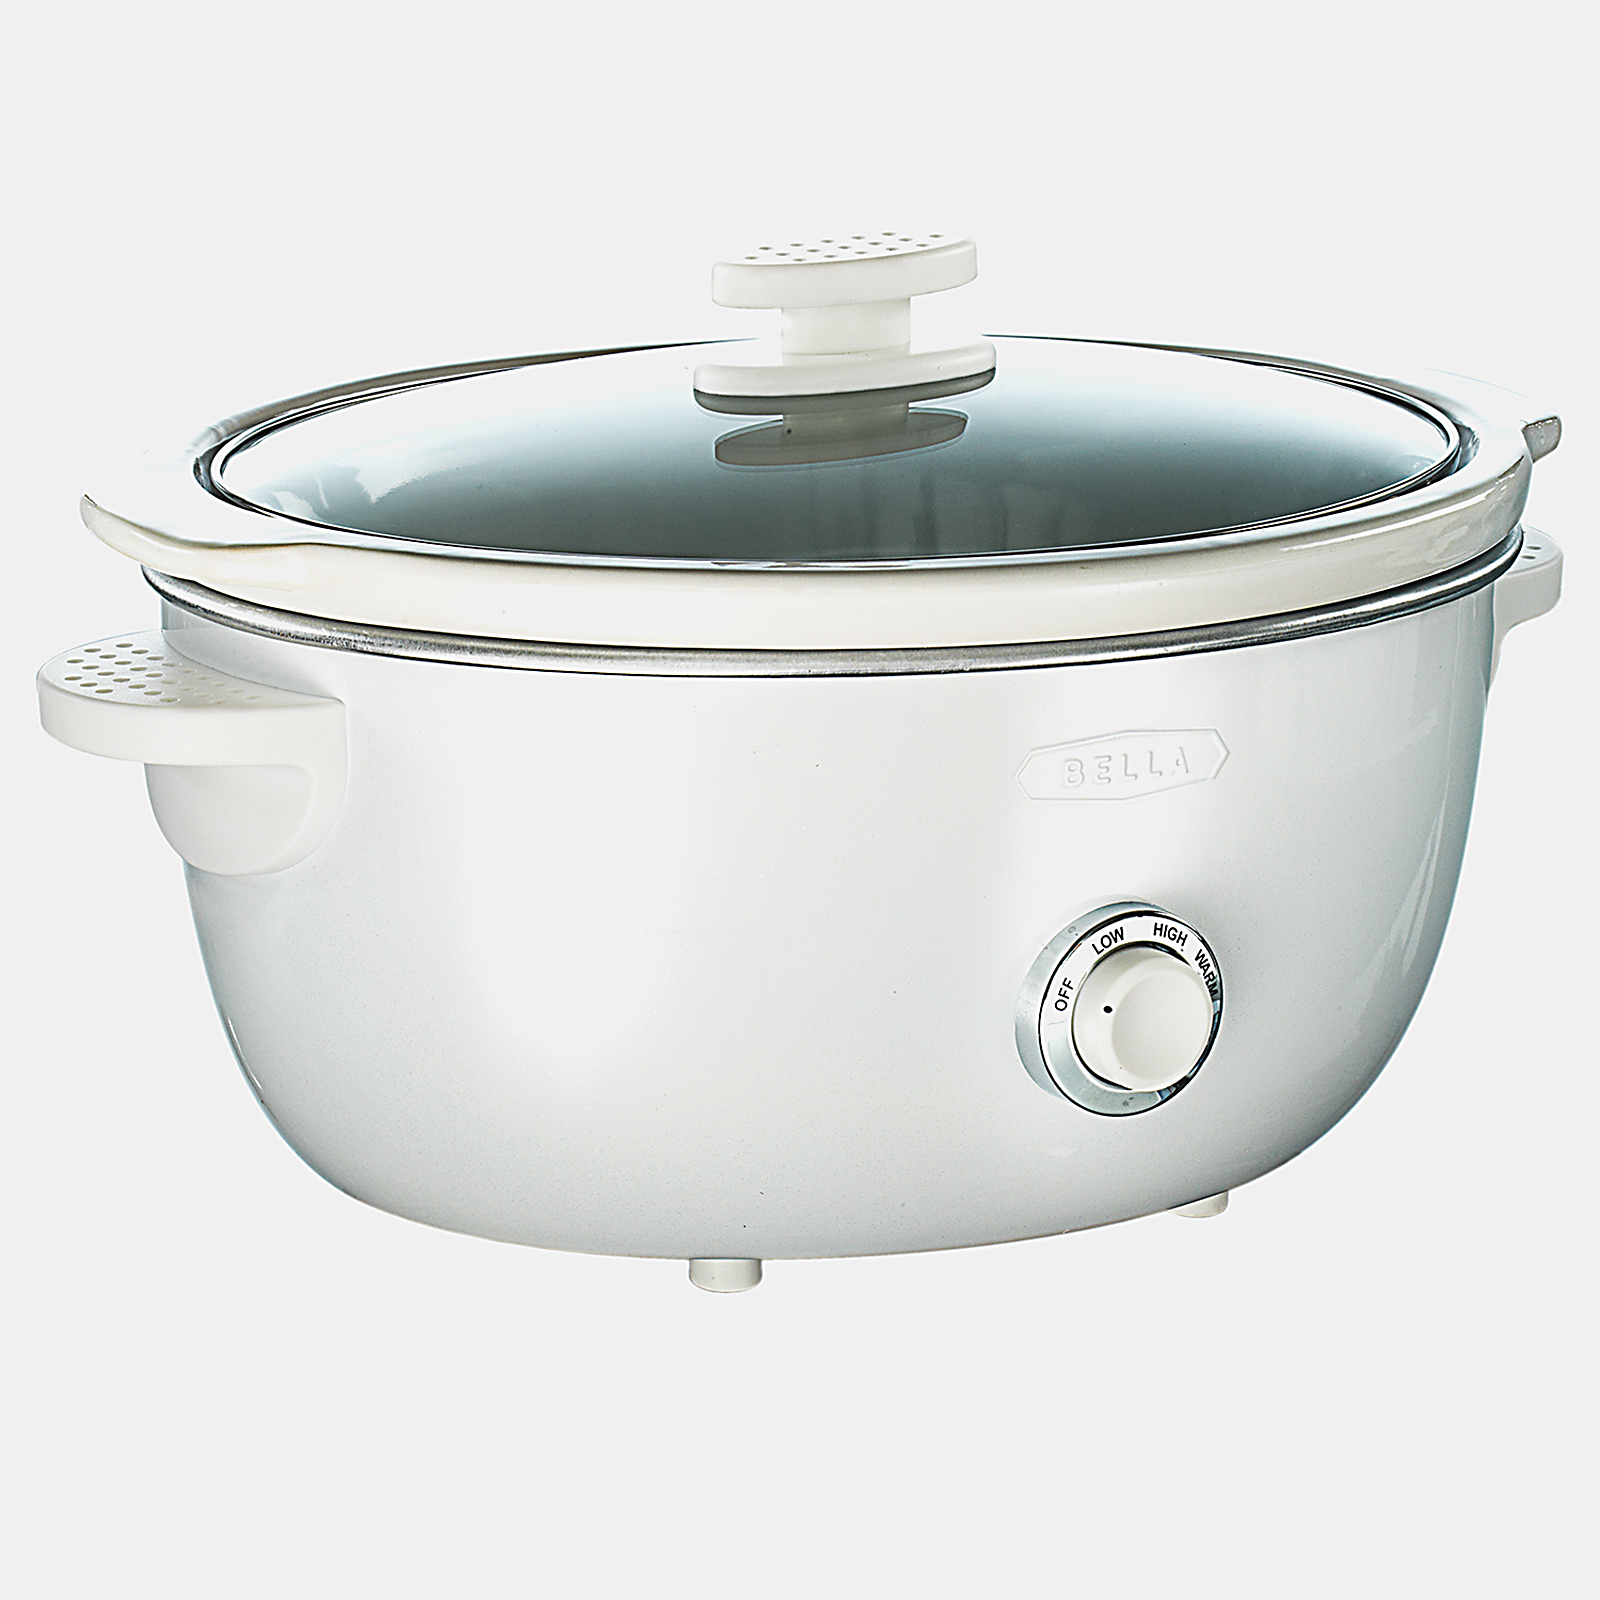 shop-bella-stainless-steel-5-quart-programmable-slow-cooker-free